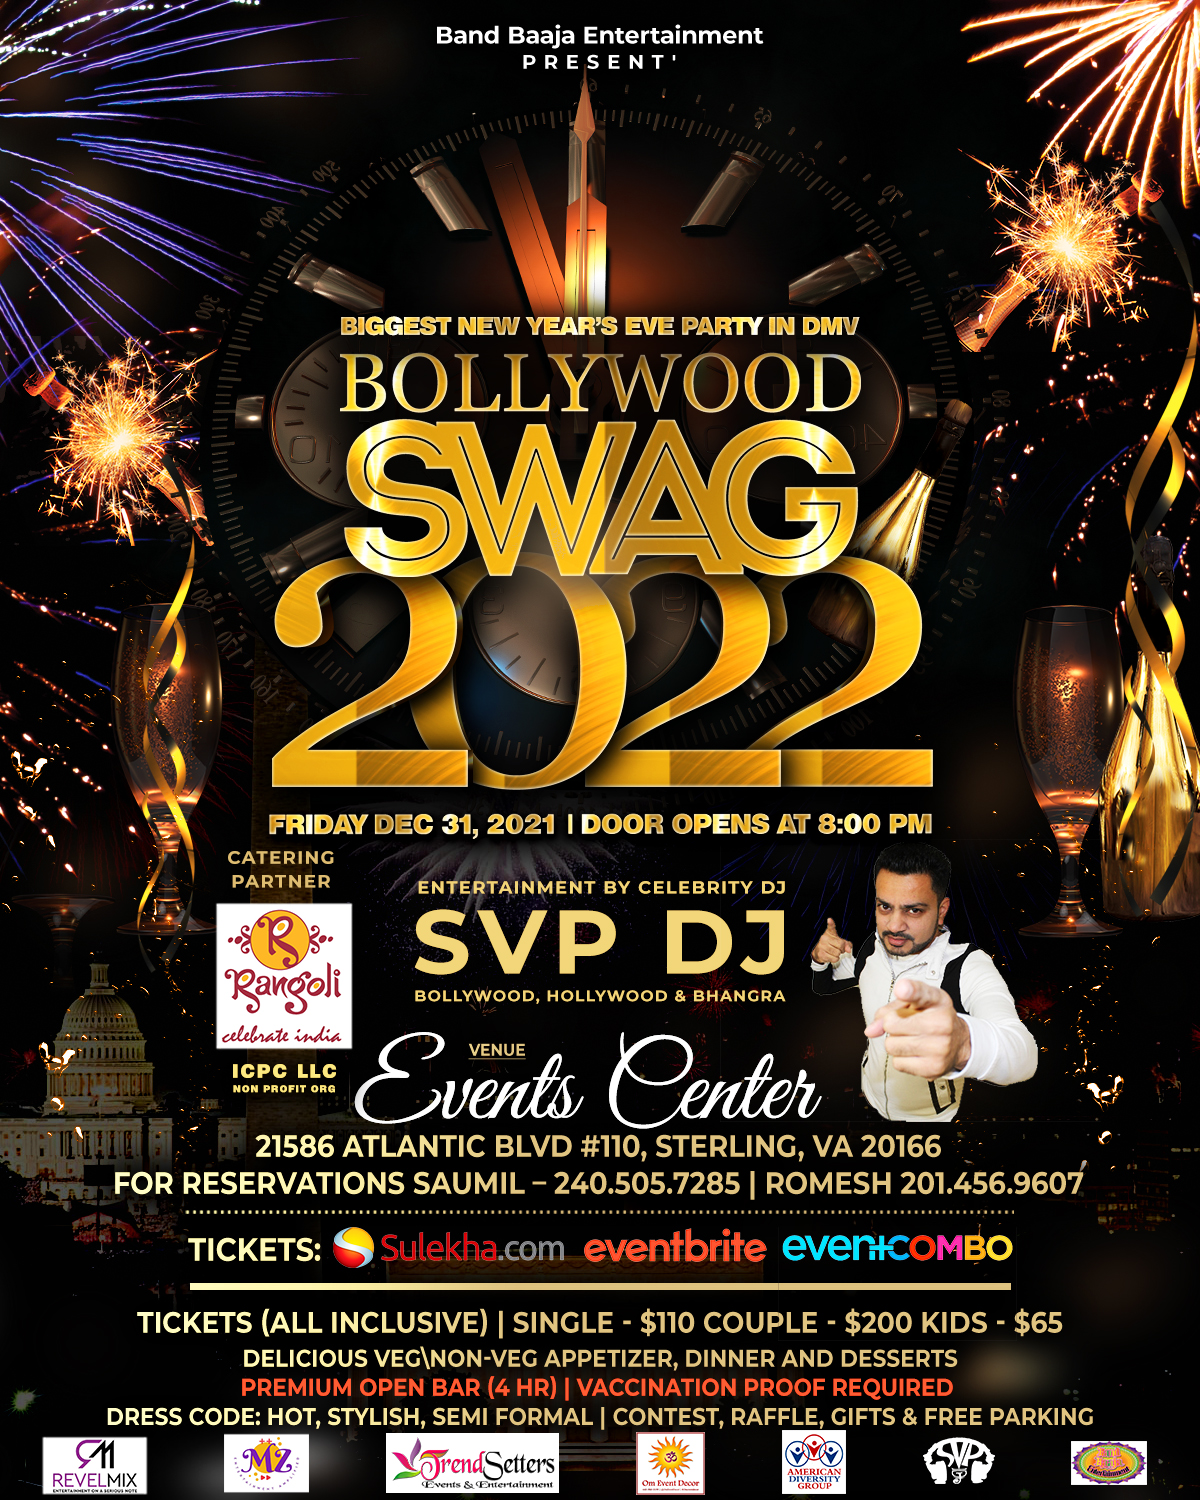 Bollywood Swag 2022 - Biggest New Year's Eve in DMV